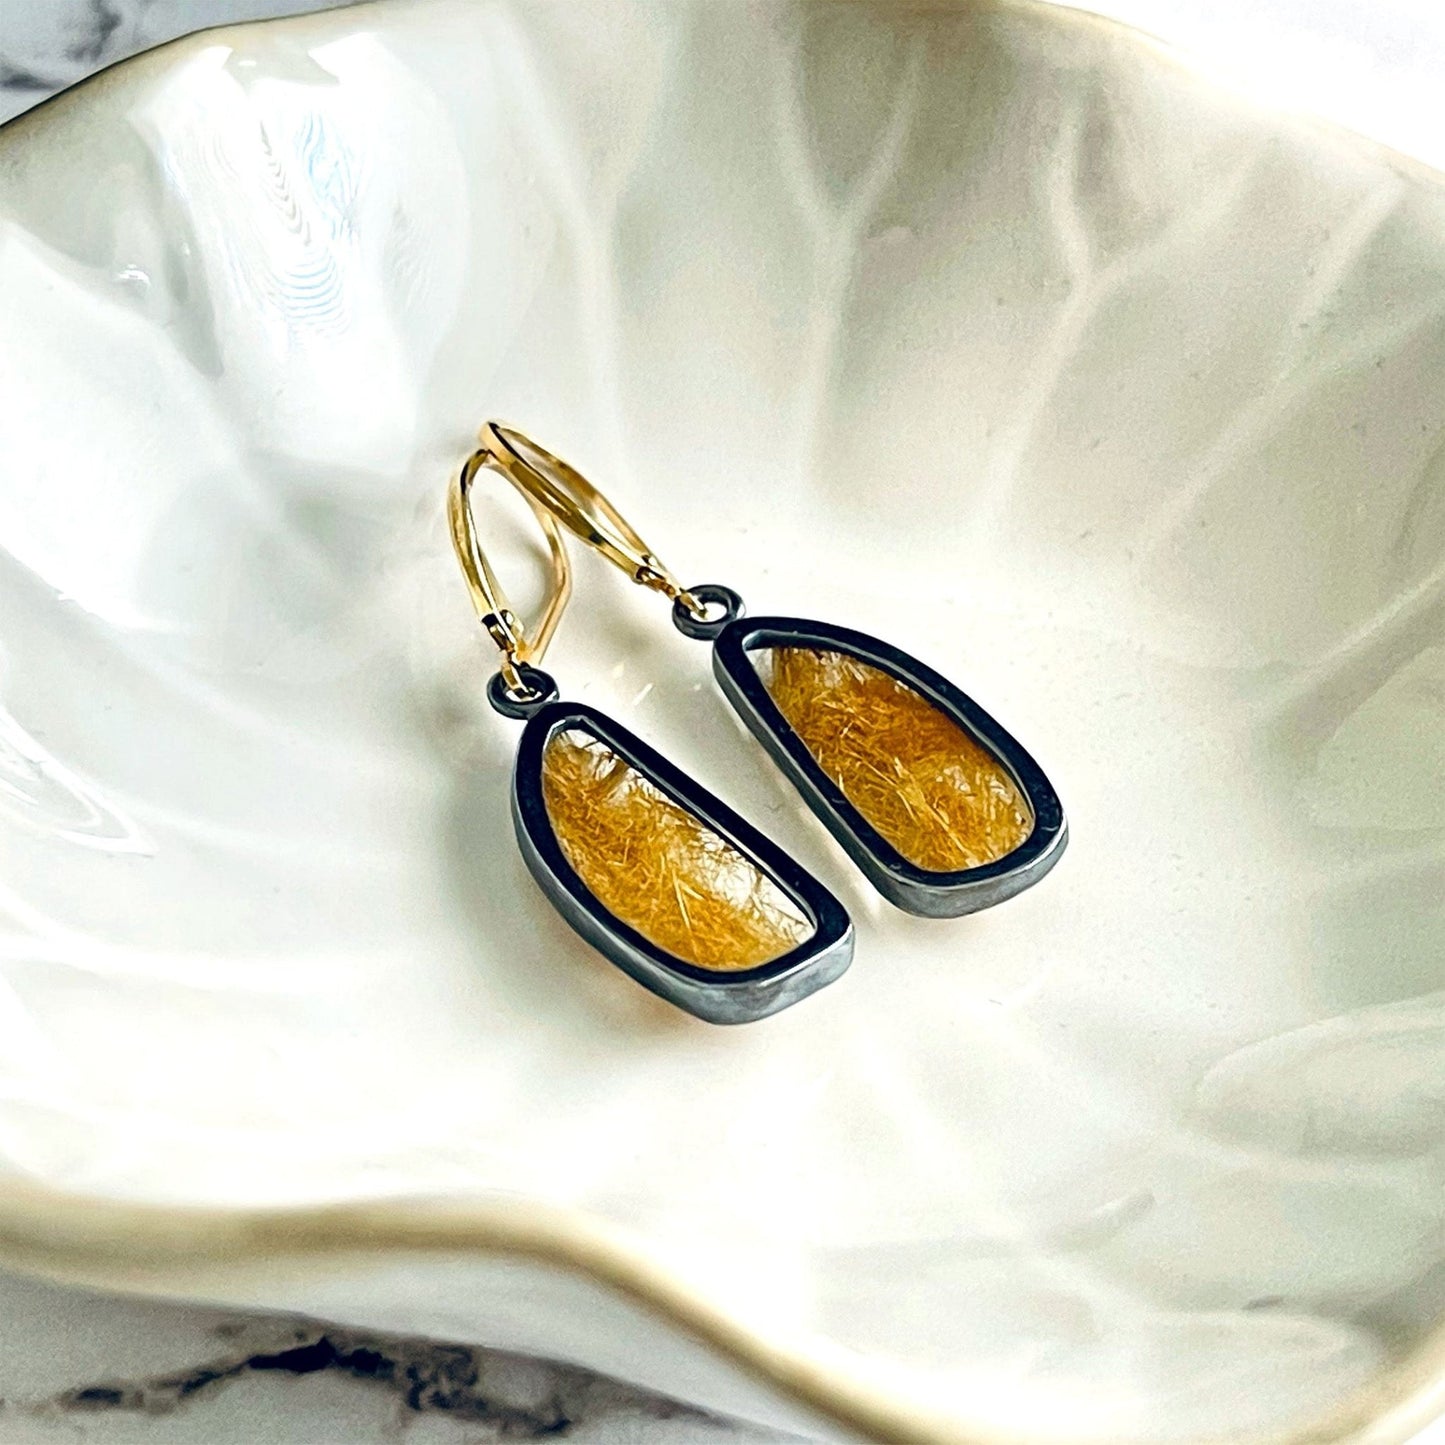 A pair of handmade sterling silver drop earrings featuring gold rutile quartz gemstones. The sterling silver bezel settings have been heavily oxidised and the earwires are 14k gold fill lever backs. The earrings are lying in a cream coloured dish. 